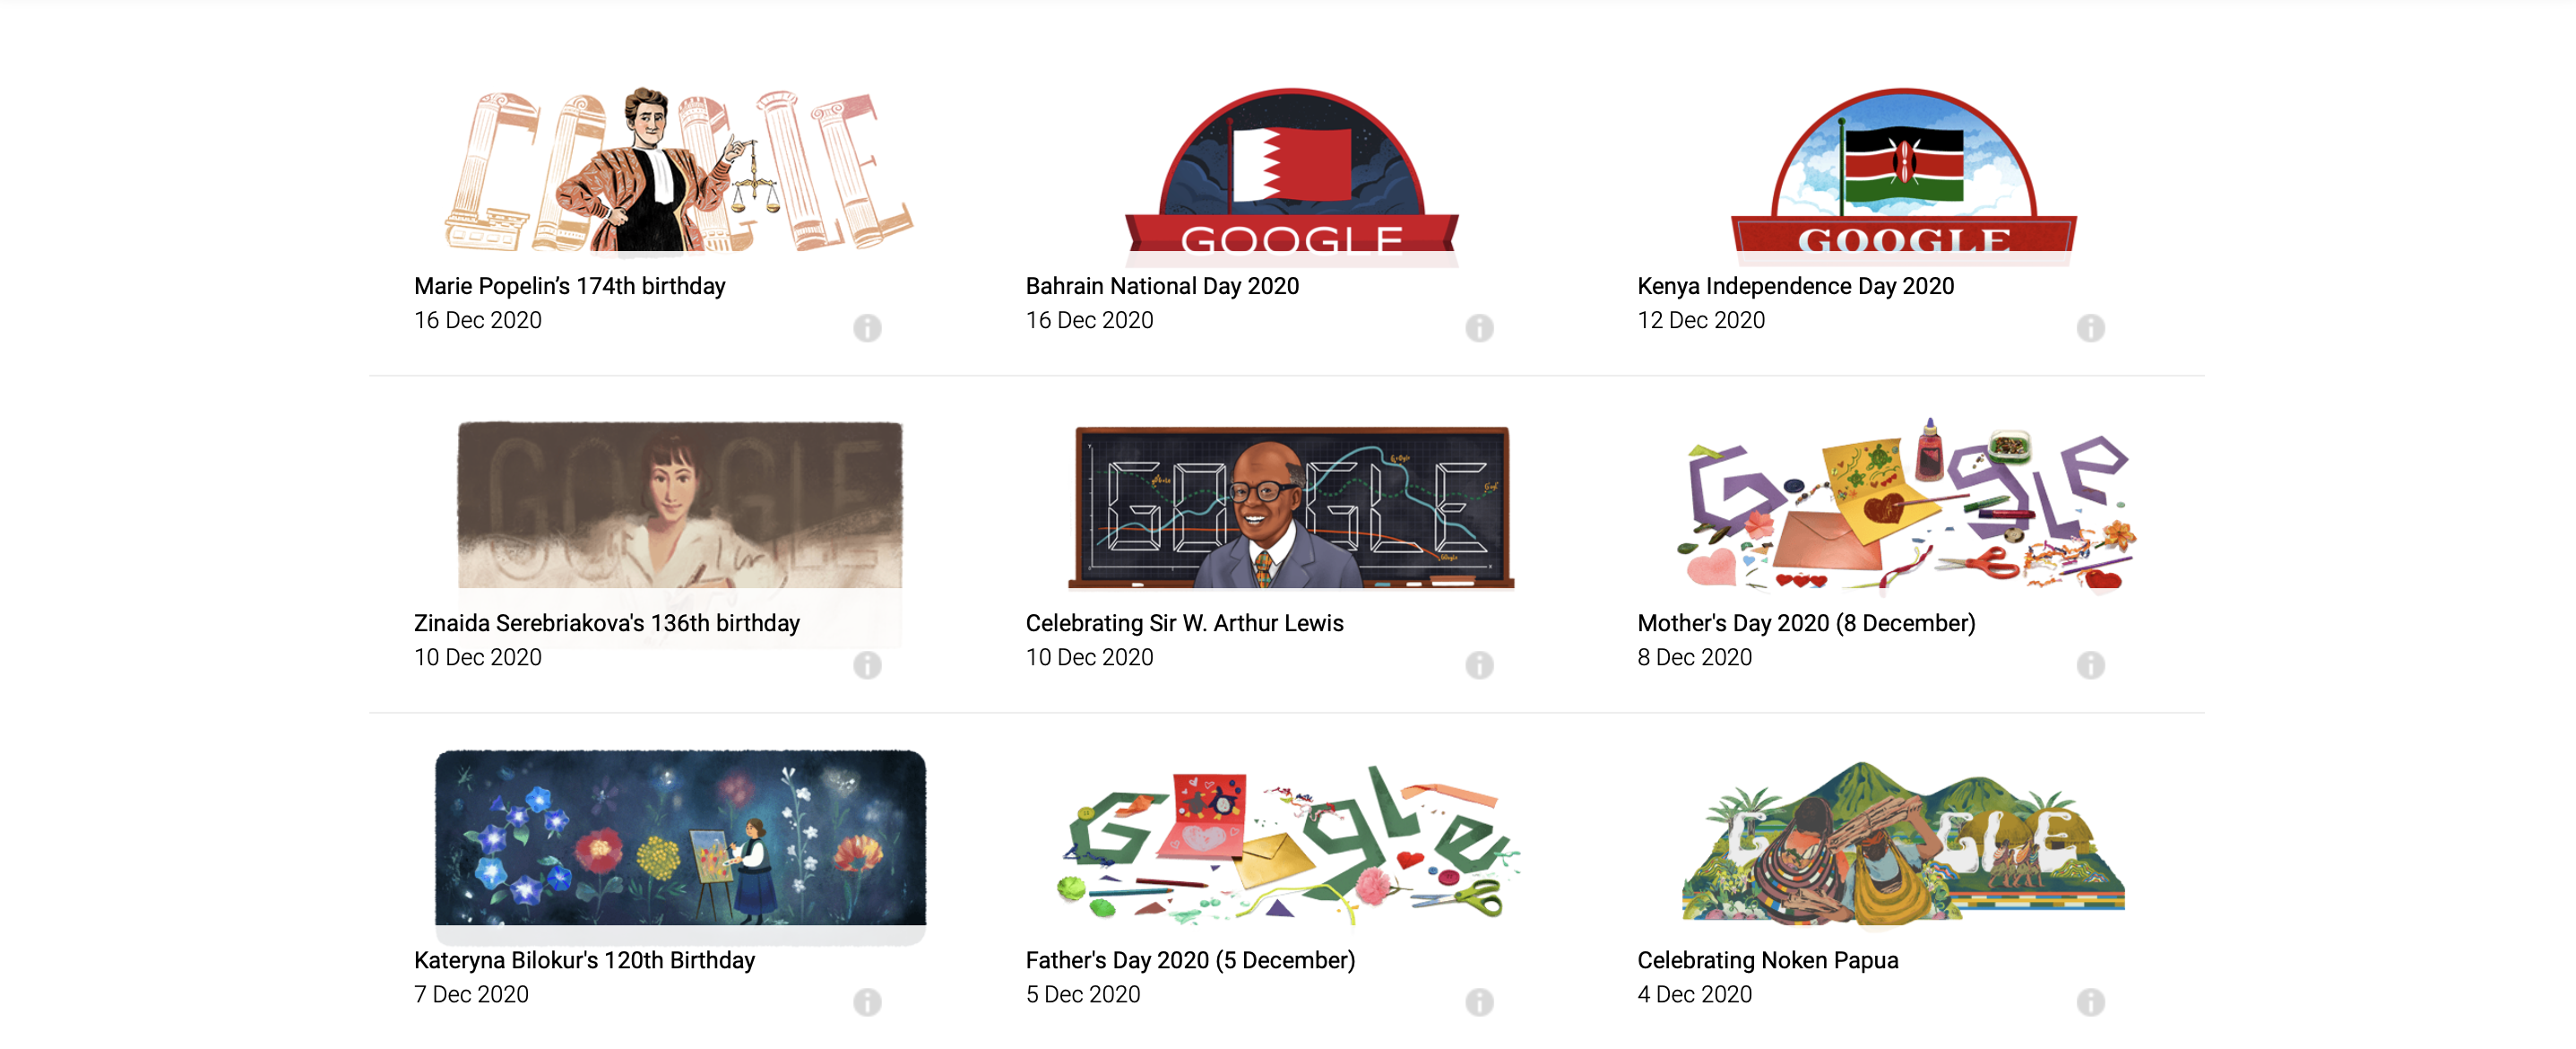 Most popular Google Doodle Games. Some of the commemorative Doodles.